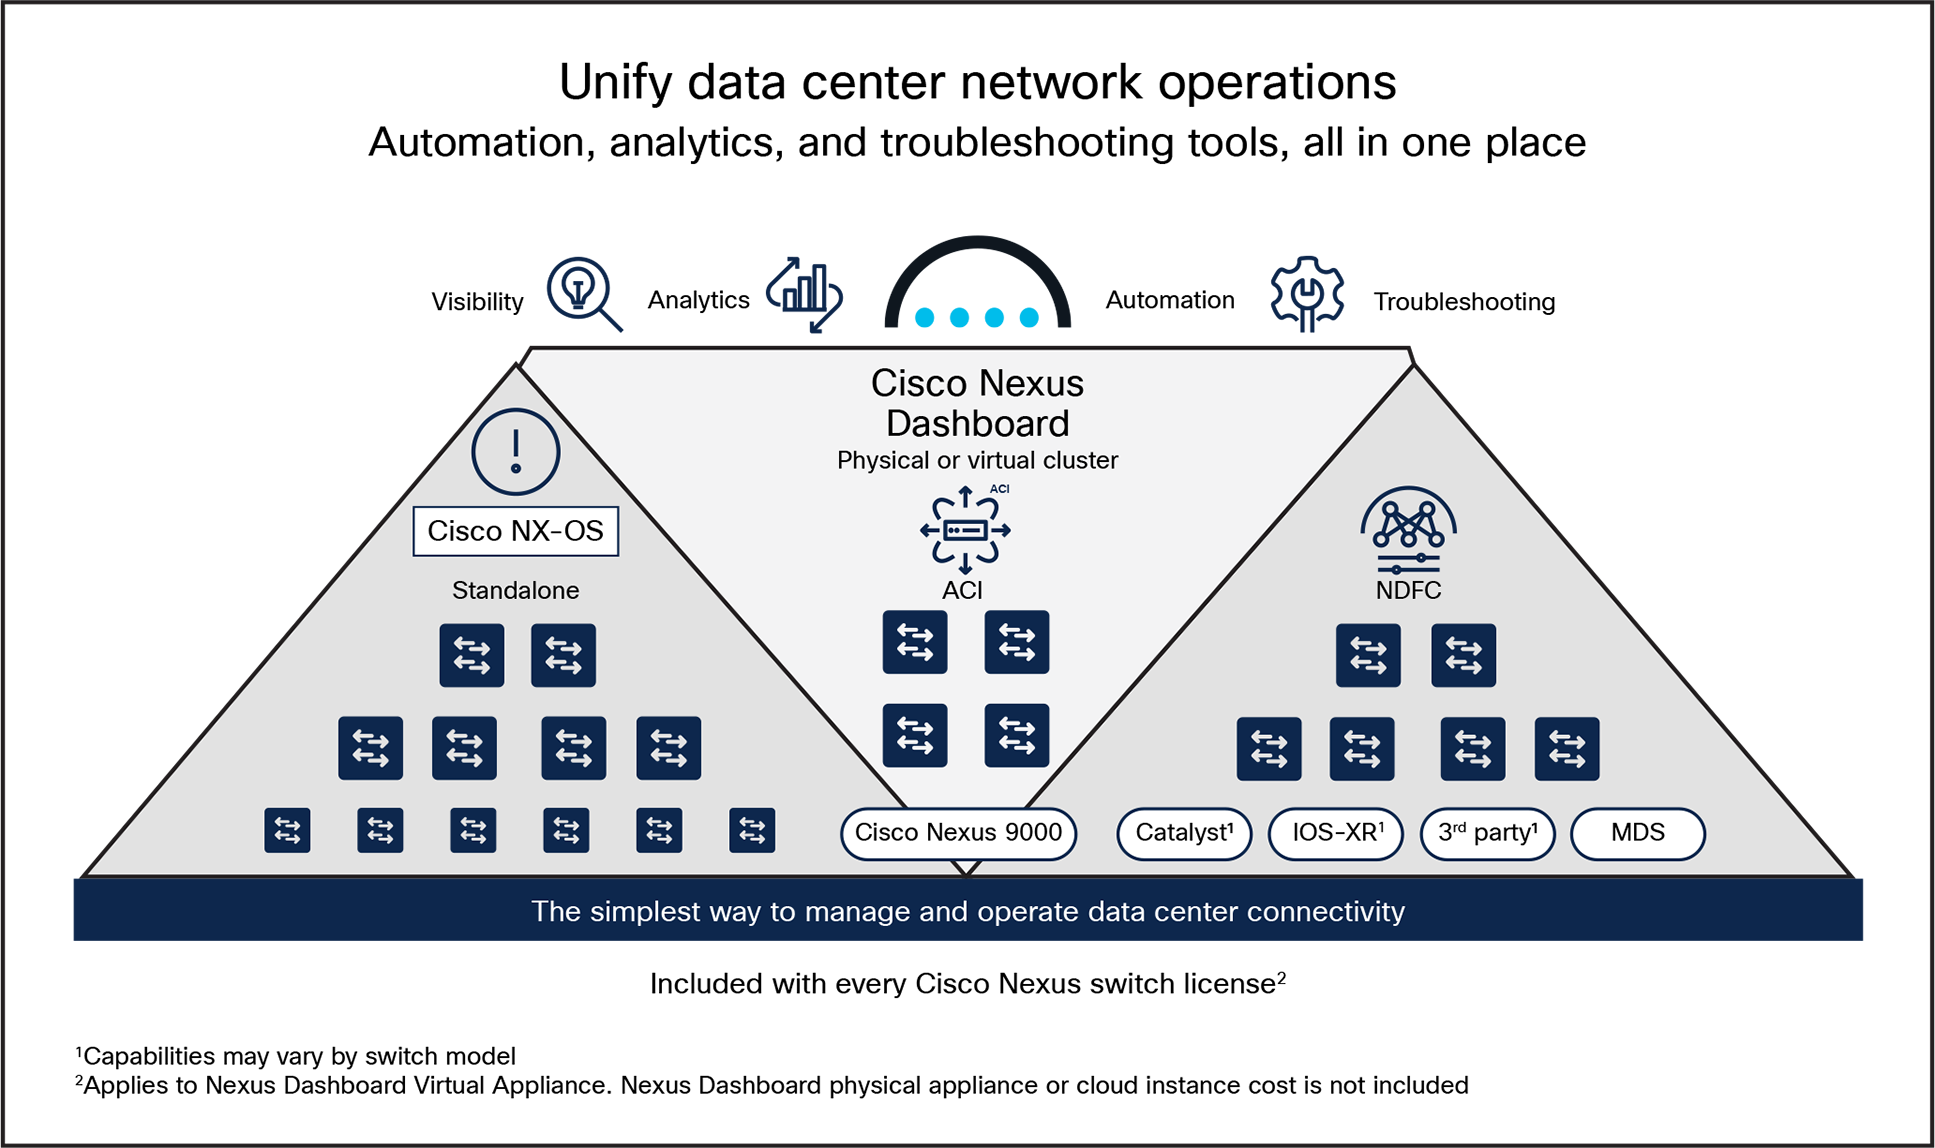 Cisco Nexus Dashboard transforms data-center and cloud network operations with simplicity, automation, and analytics